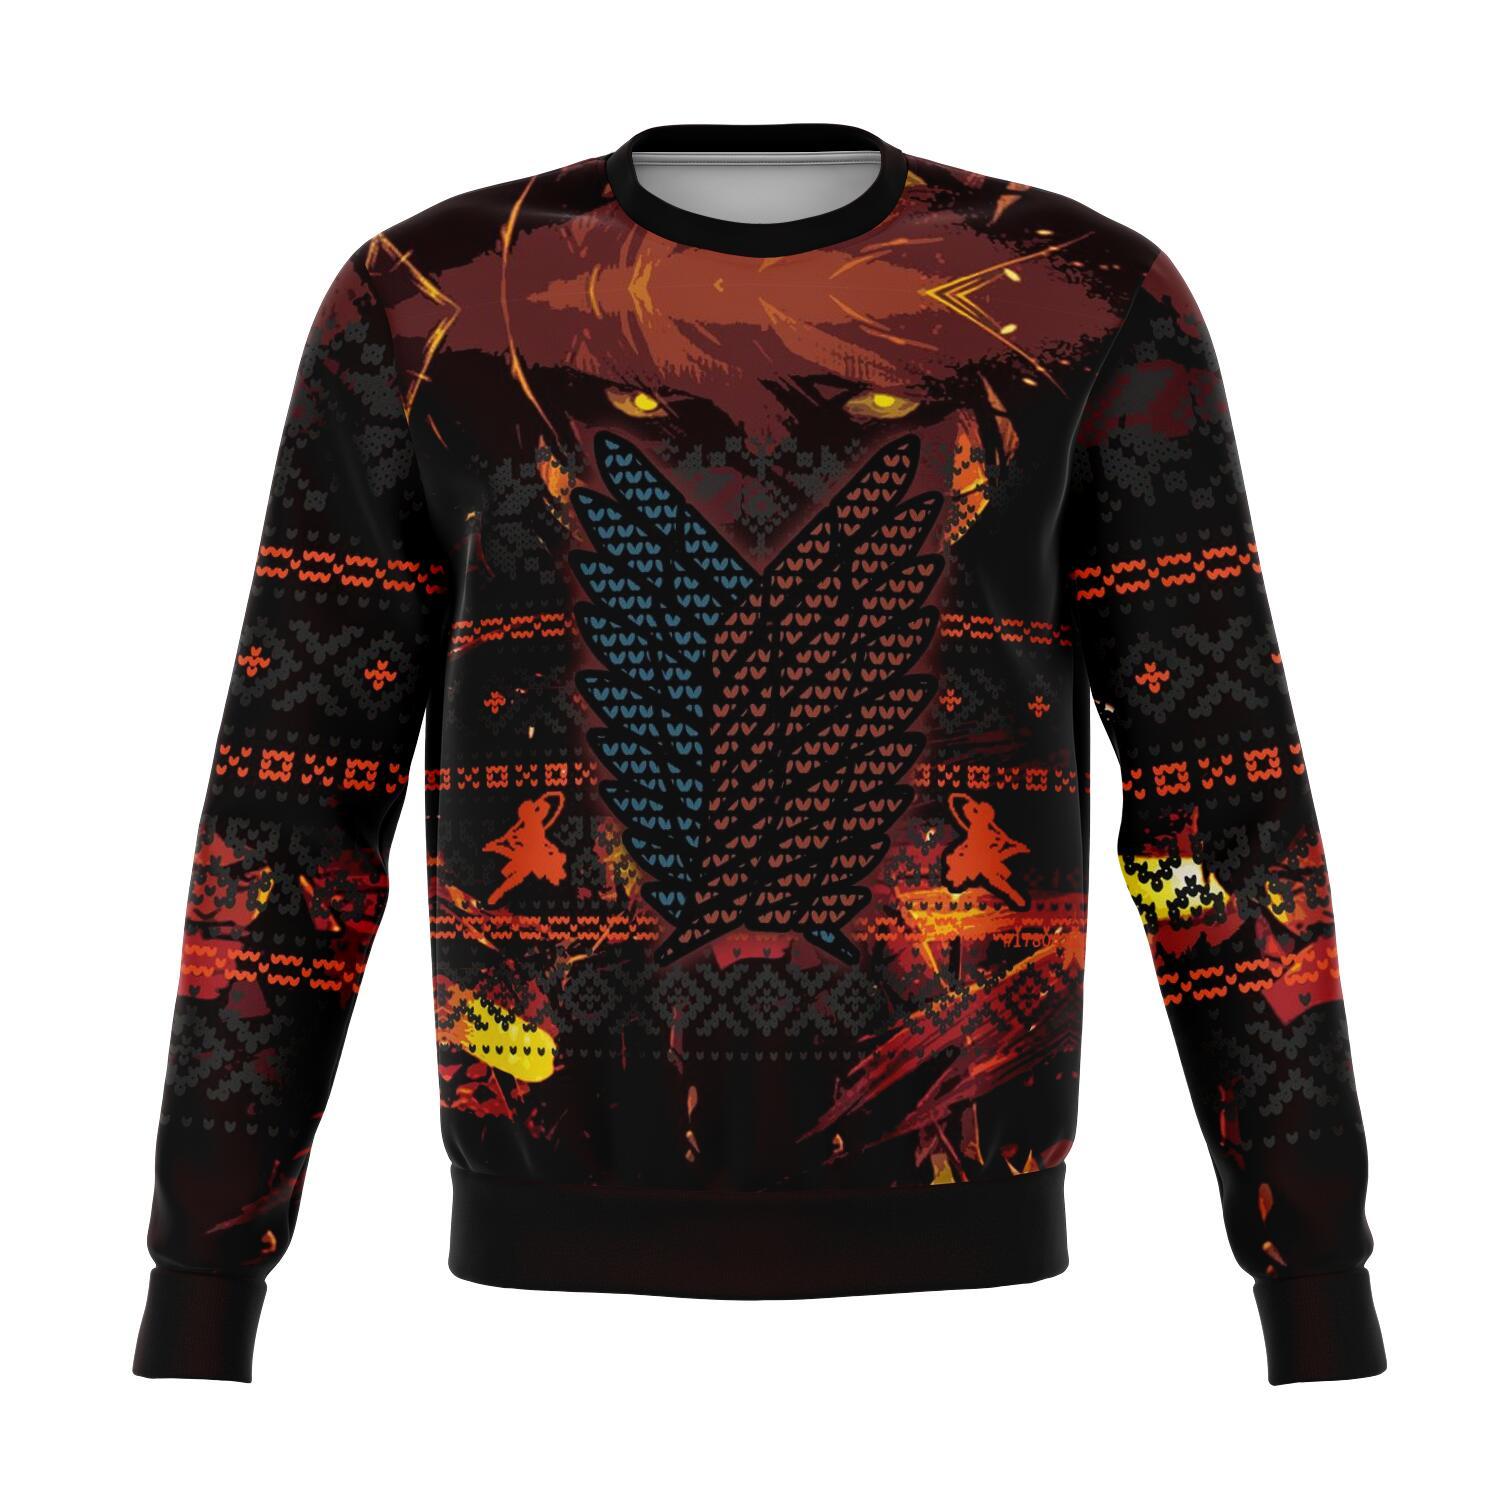 attack on titan 3d ugly christmas sweater 593633 - Attack On Titan Shop